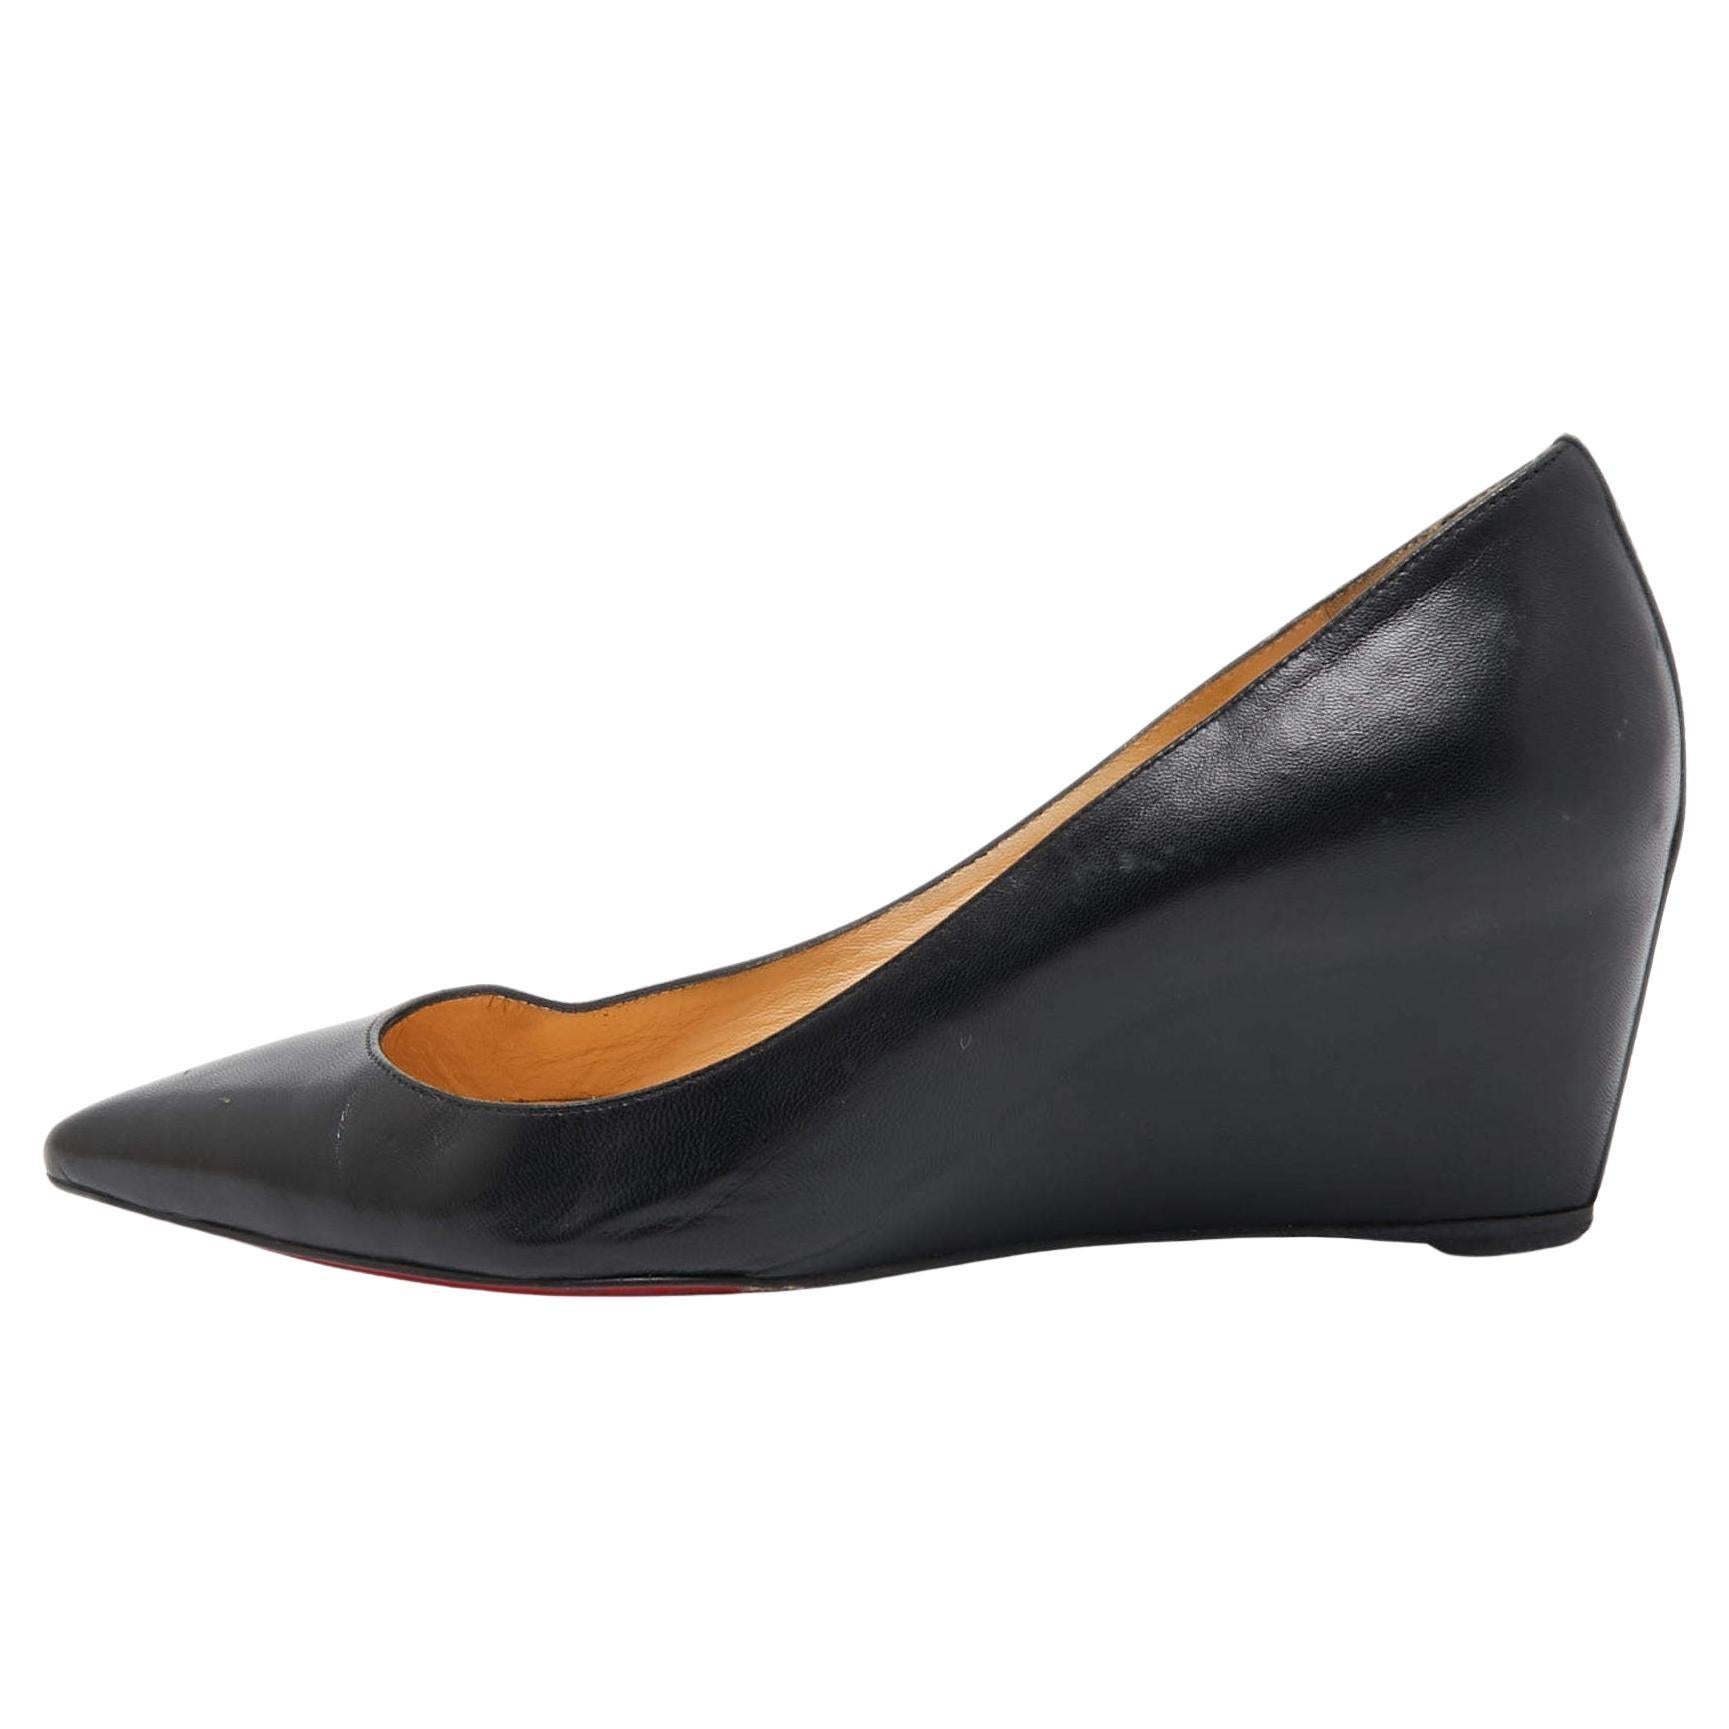 Christian Louboutin Black Leather Pointed Toe Wedge Pumps Size 37.5 For Sale